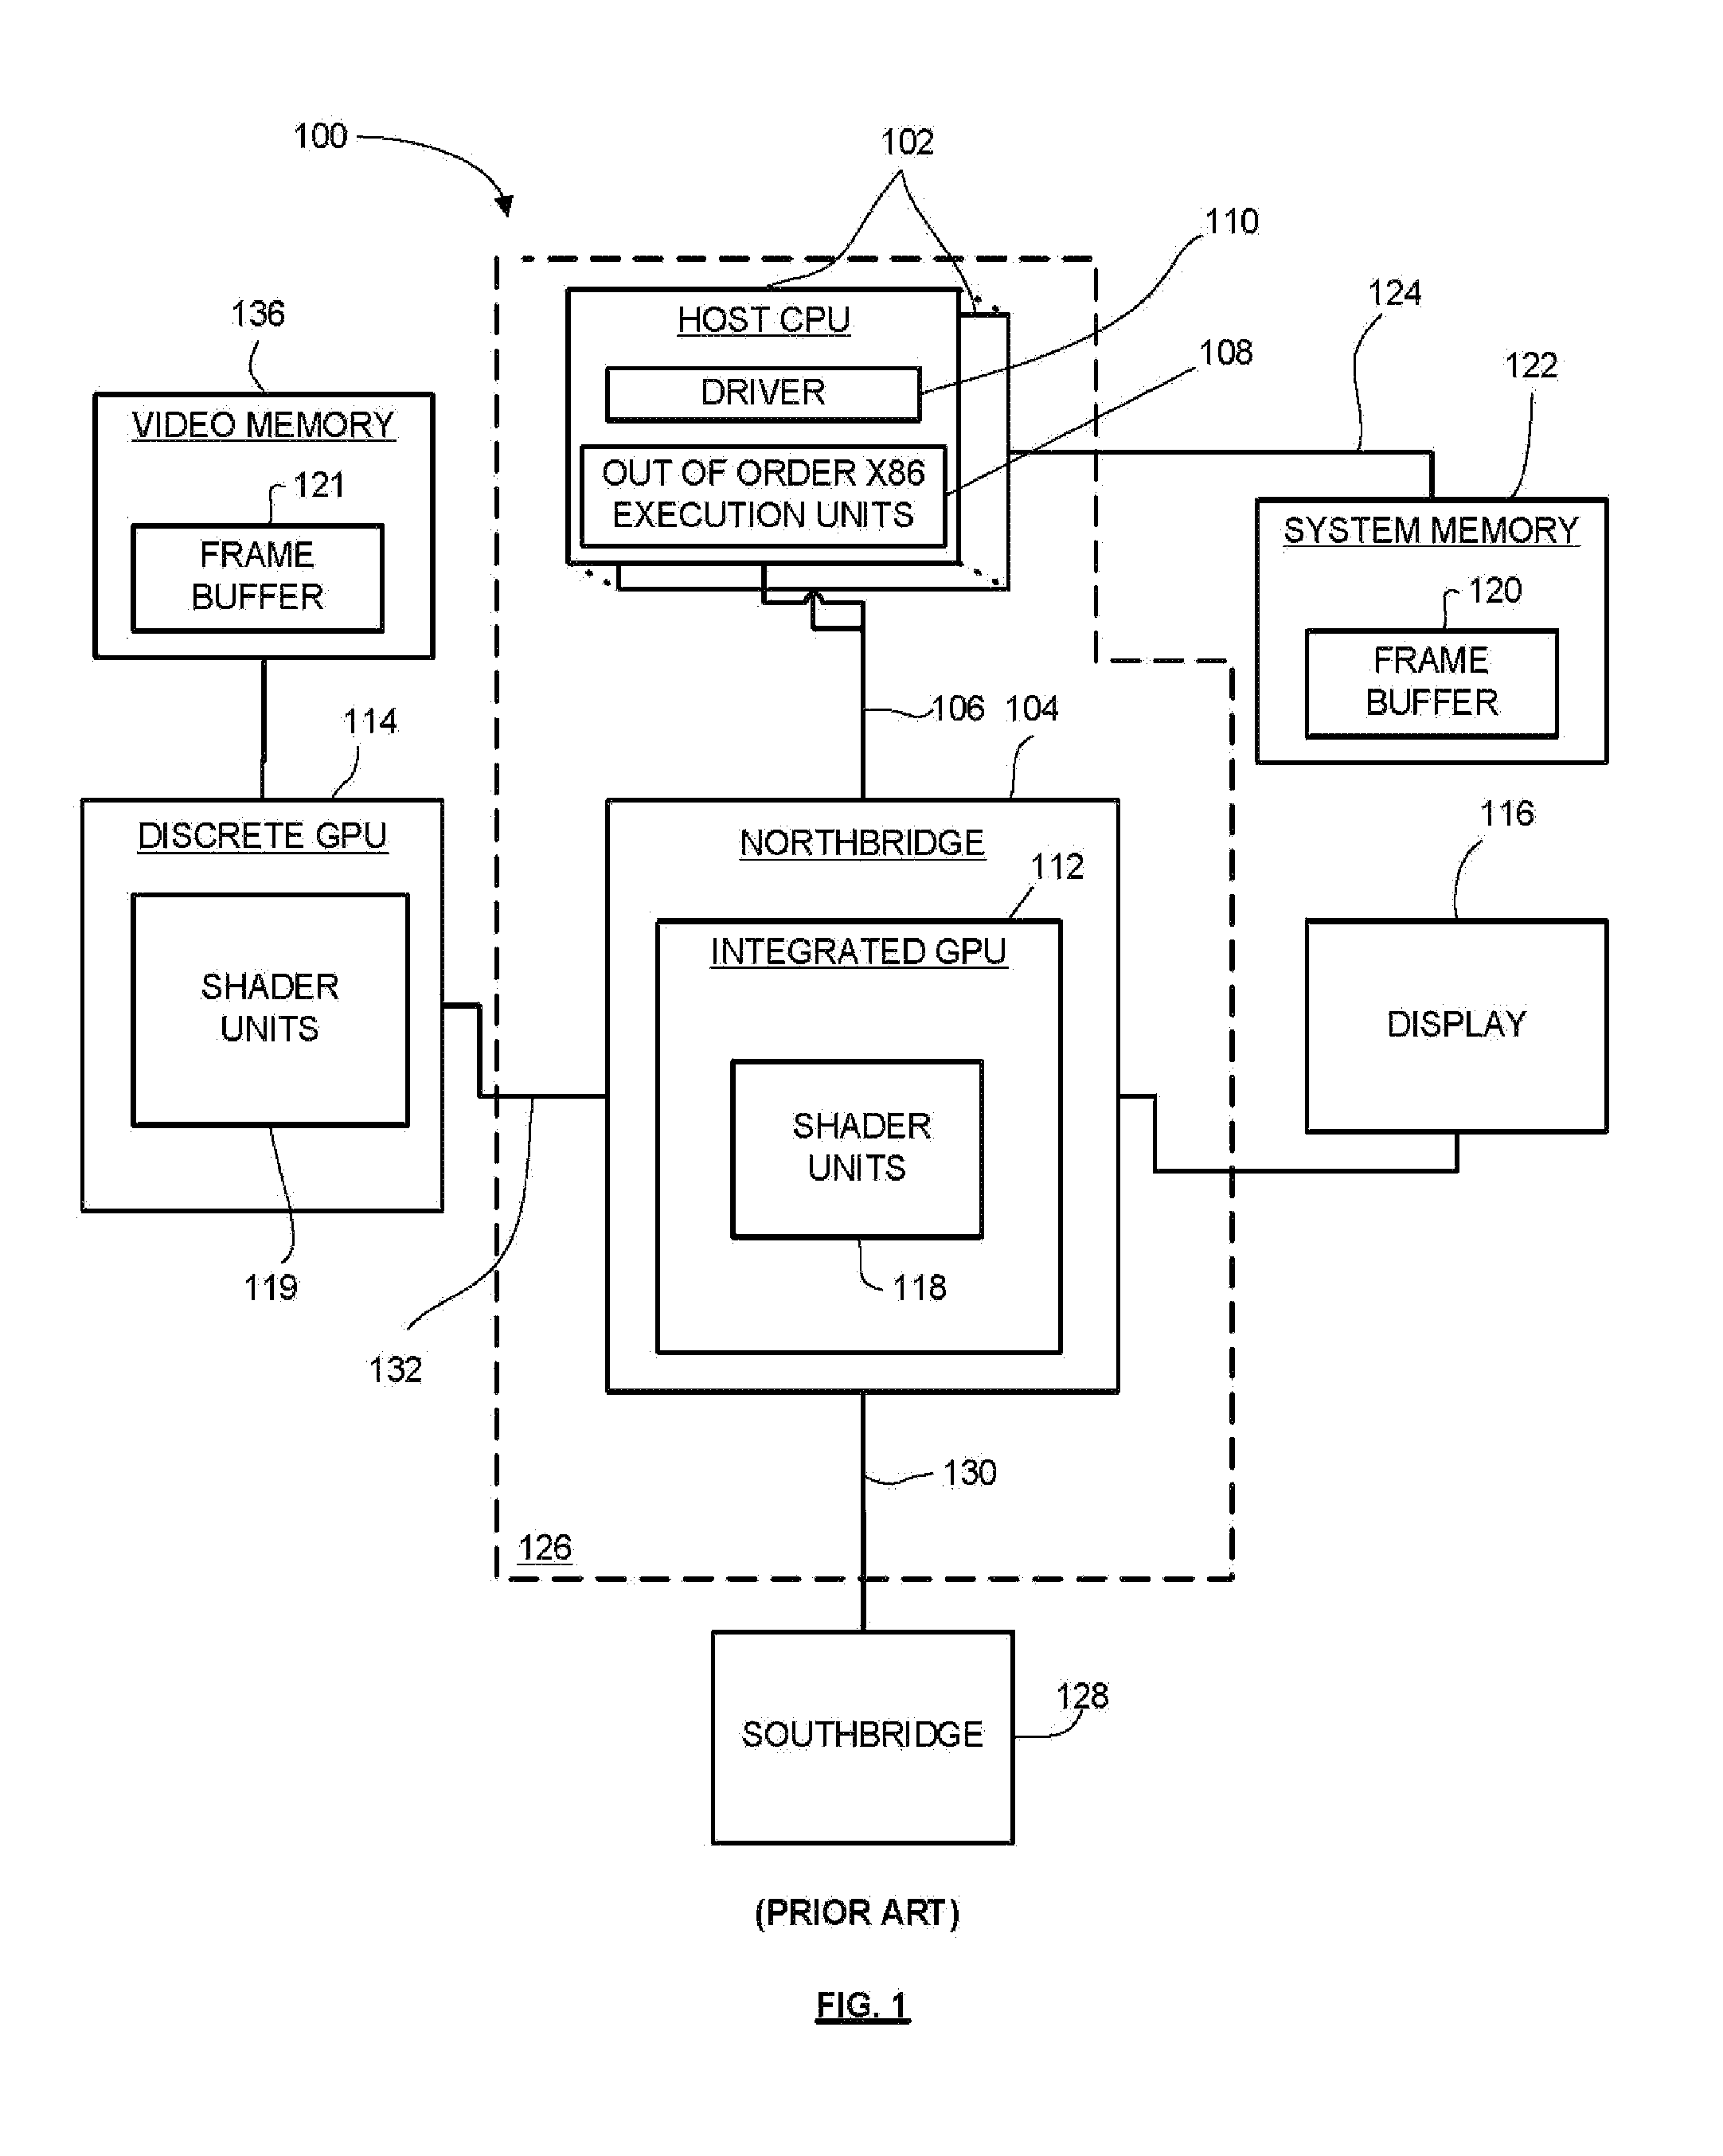 Method, System, and Apparatus for Processing Video and/or Graphics Data Using Multiple Processors Without Losing State Information